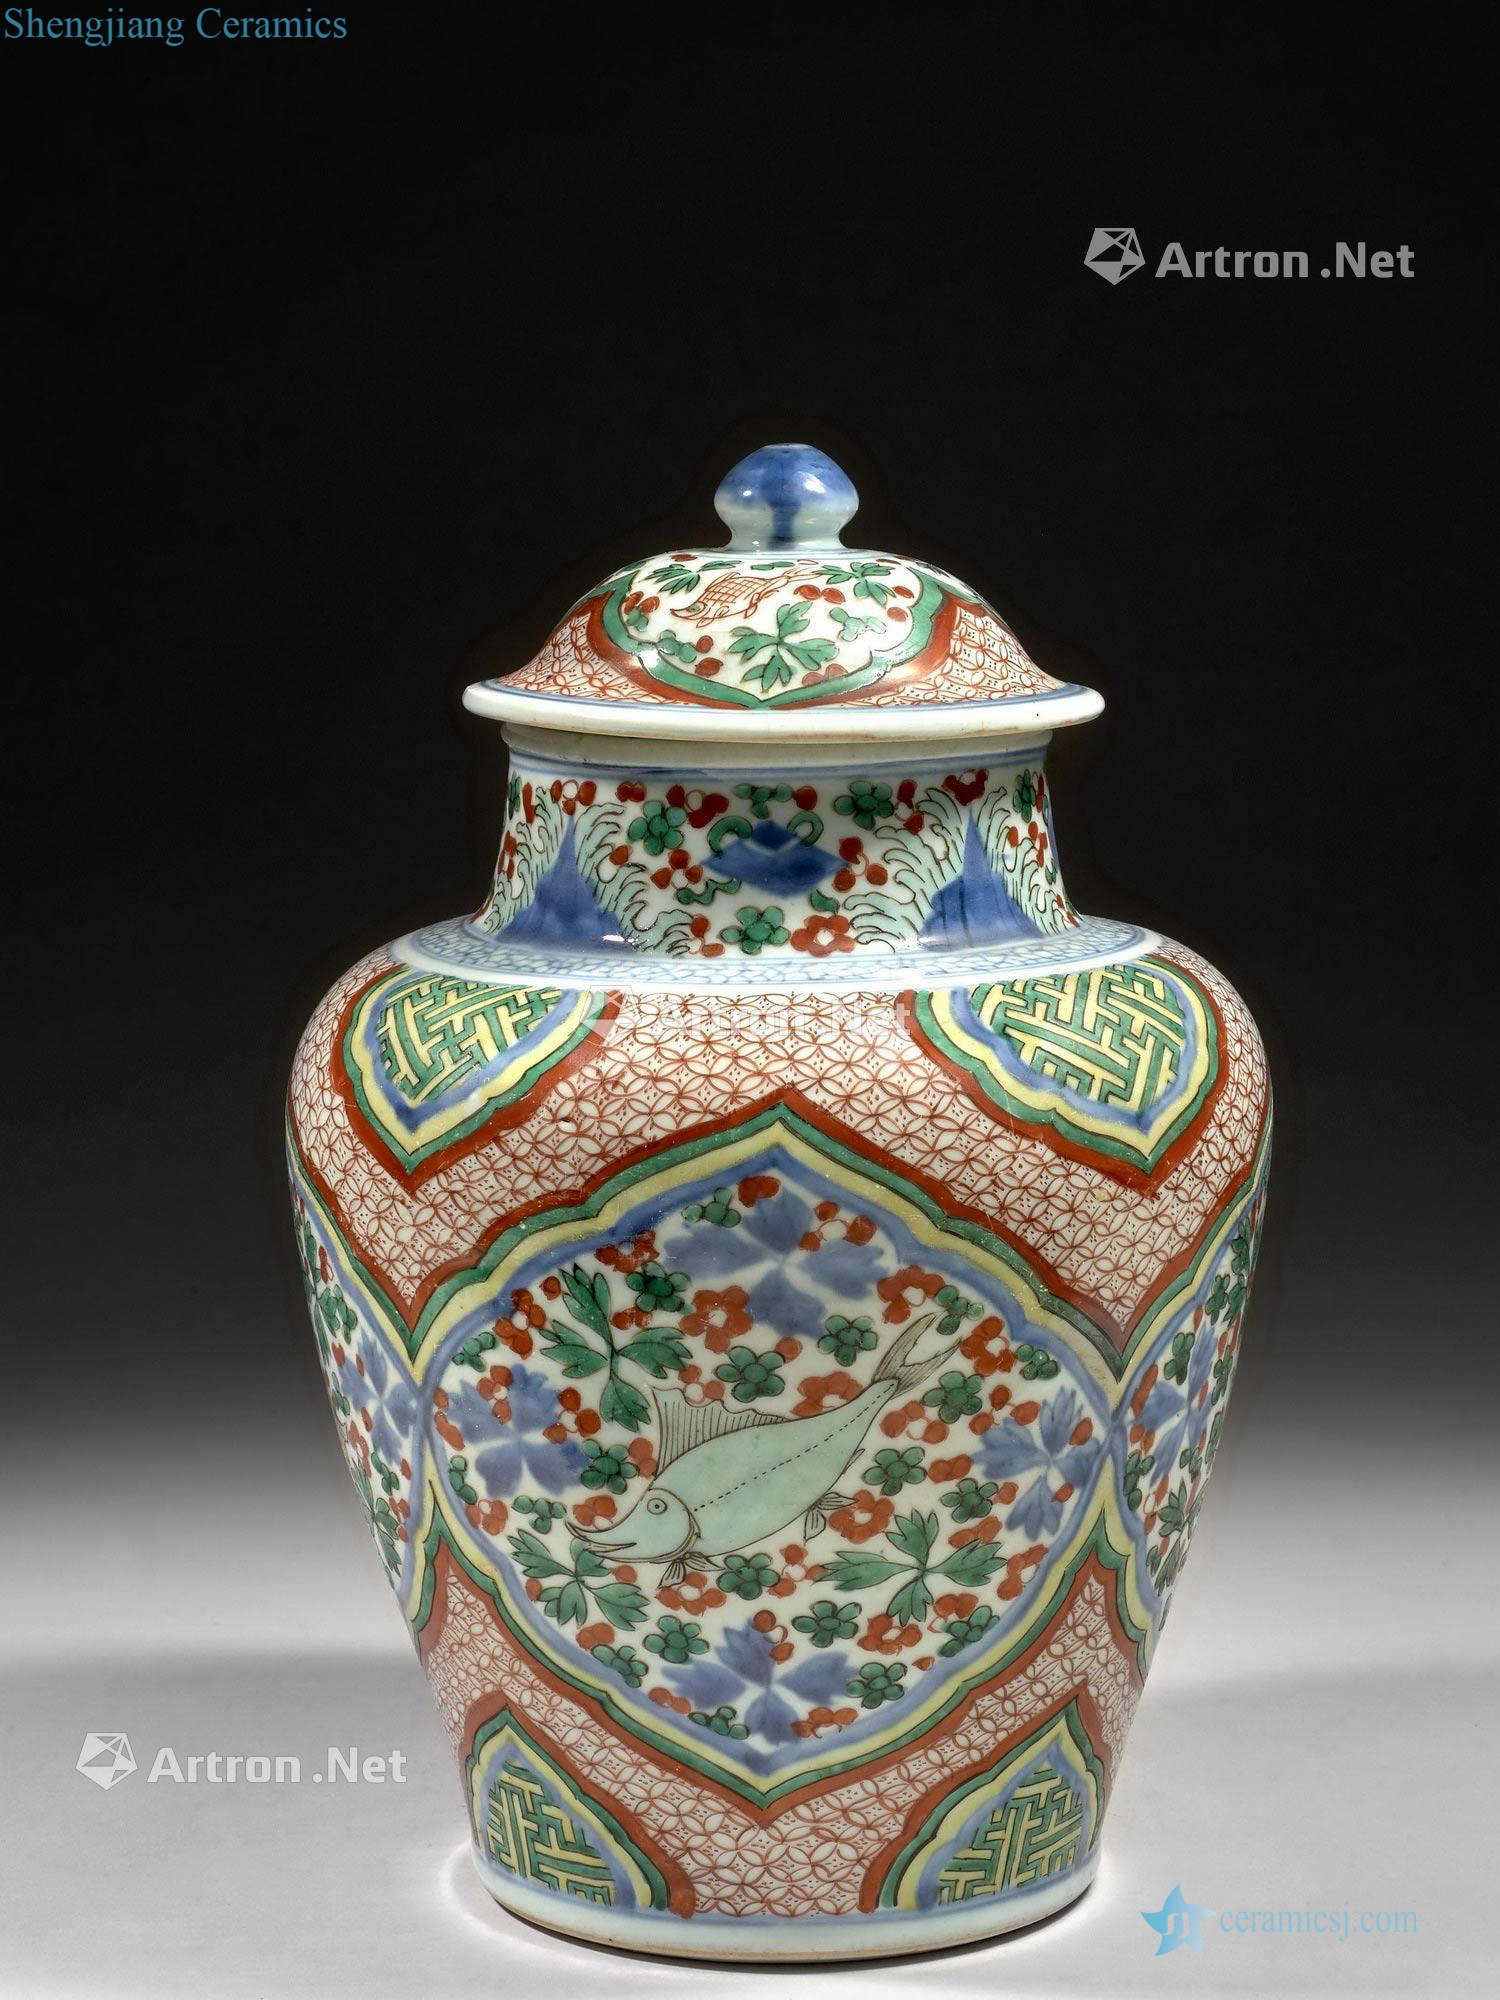 China, the Transitional period, 17 th century A Wucai porcelain jar and cover